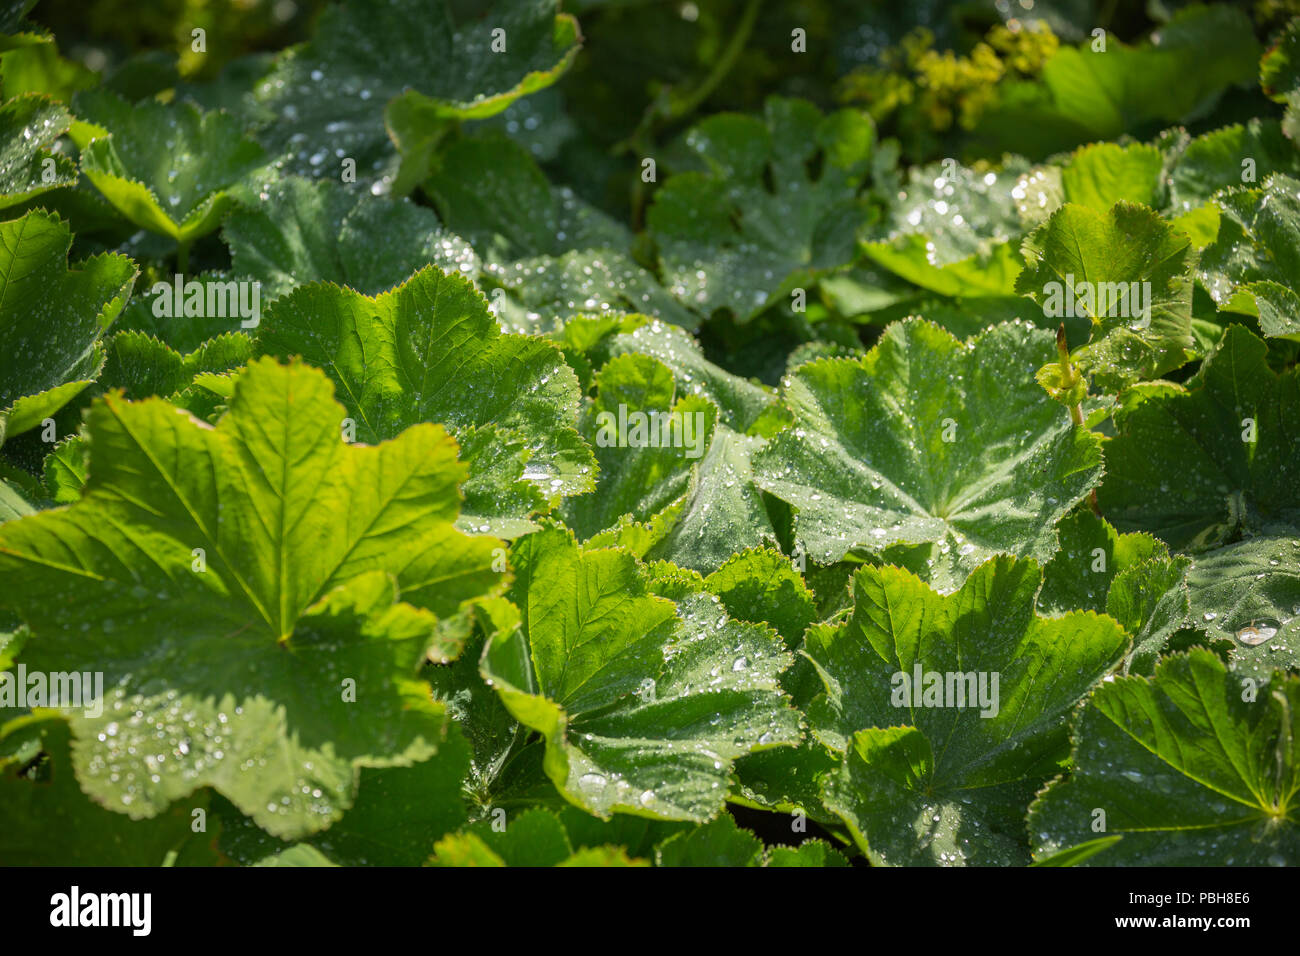 Rain droplets collected on the leaves of a Ladys Mantle plant. Stock Photo